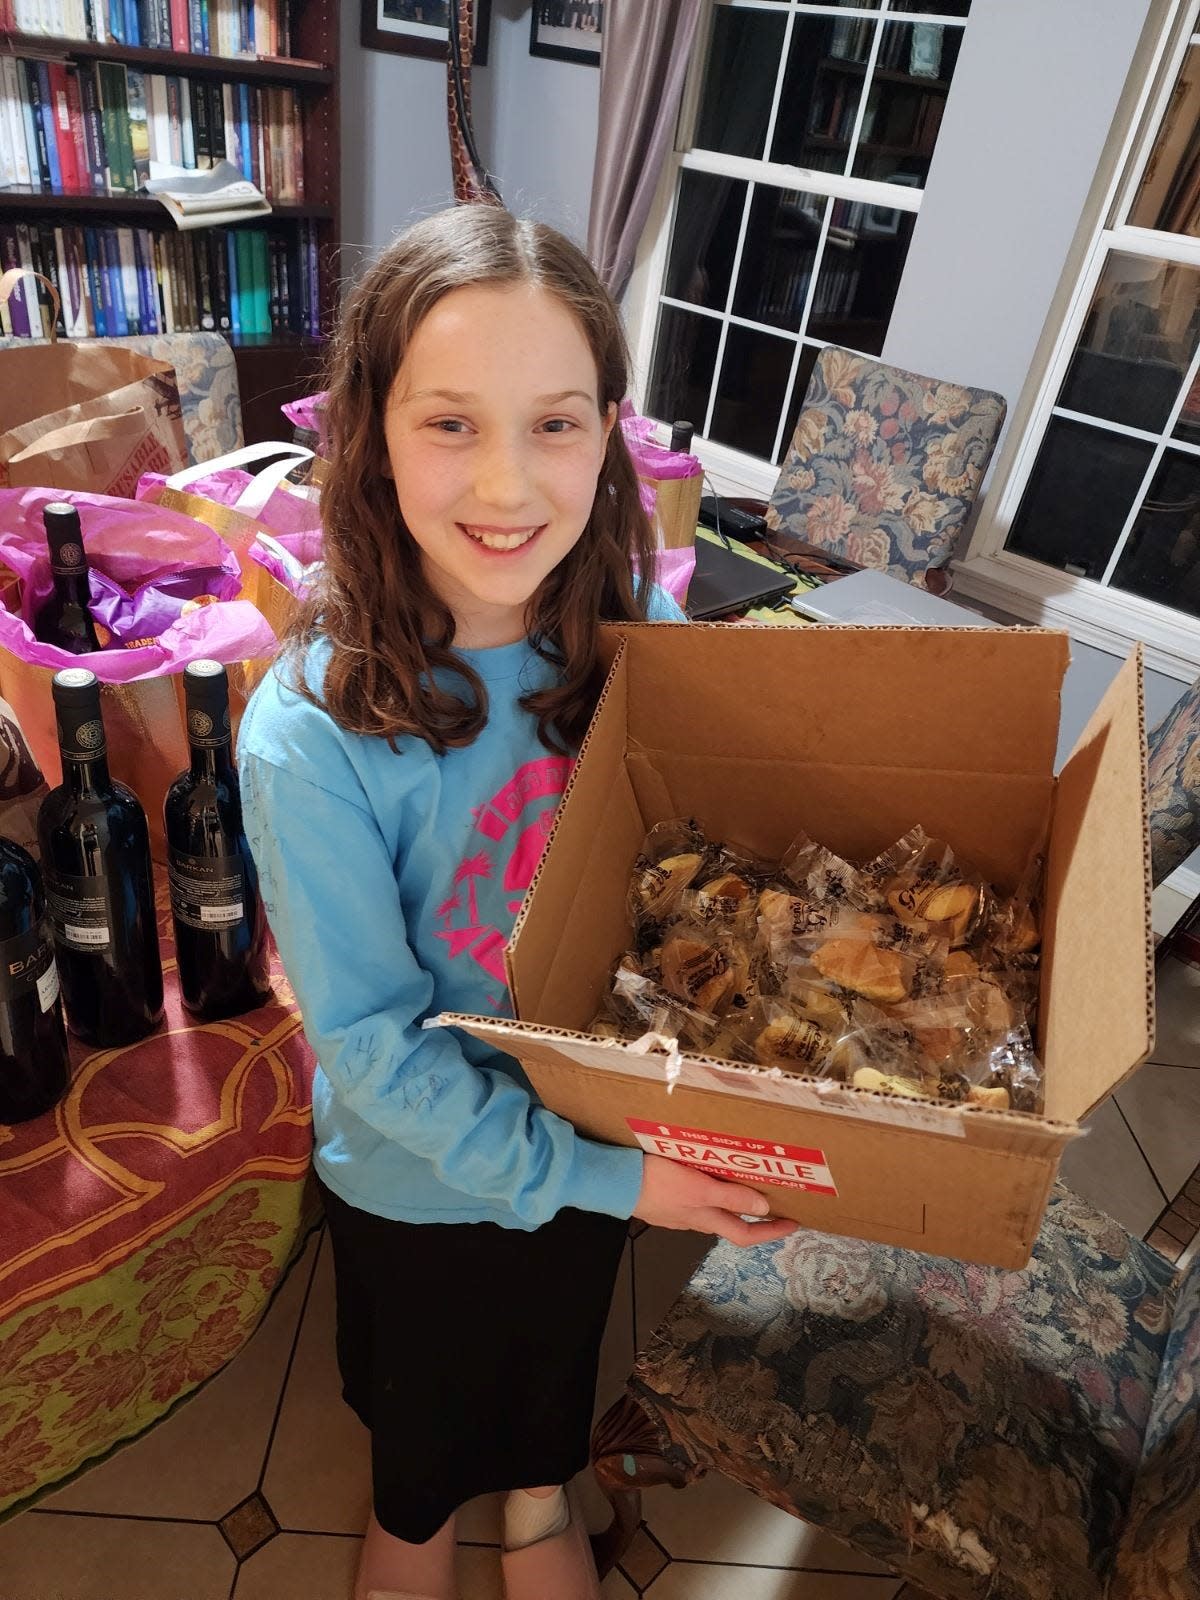 Rabbi Mendel Lifshitz's daughter poses with a surprise box of hamantaschen cookies left on the doorstep of his Chabad center in Boise. "We feel quite strongly that our non-Jewish neighbors, by-in-large, have stepped up to demonstrate their support," he says.